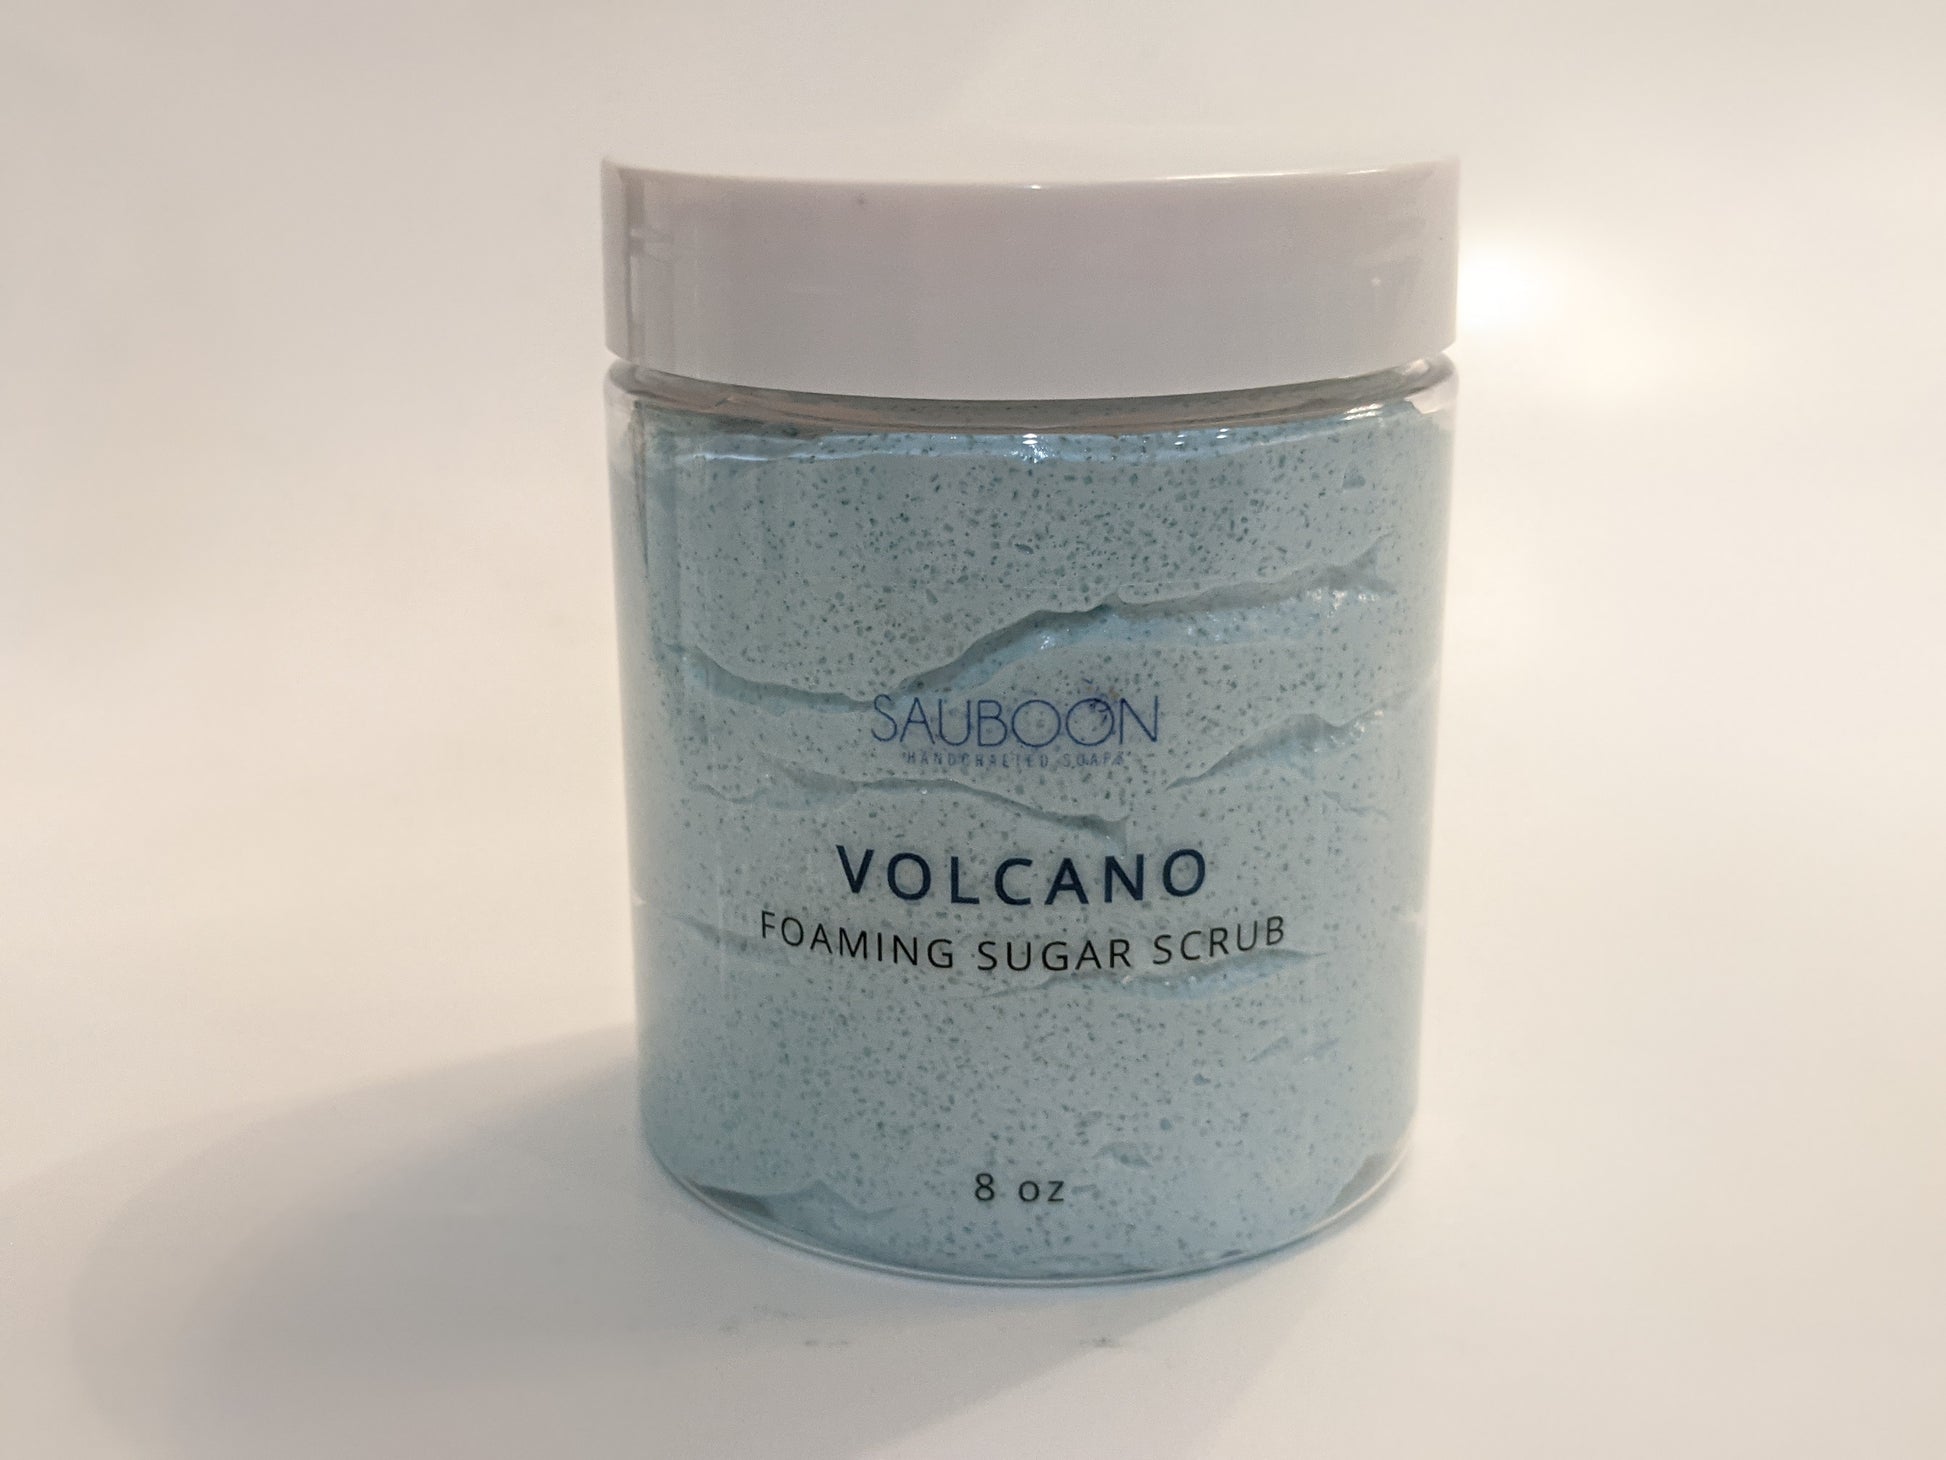 Volcano Foaming Sugar Scrubs. made locally here in San Diego in small batches.  Highest quality ingredients used to give the best lather, nourishment, exfoliation and cleansing experience.  Made with organic cane sugar, jojoba oil and sweet almond oil. Great for gifting for birthdays, celebrations, bridal showers or self care gift to yourself!